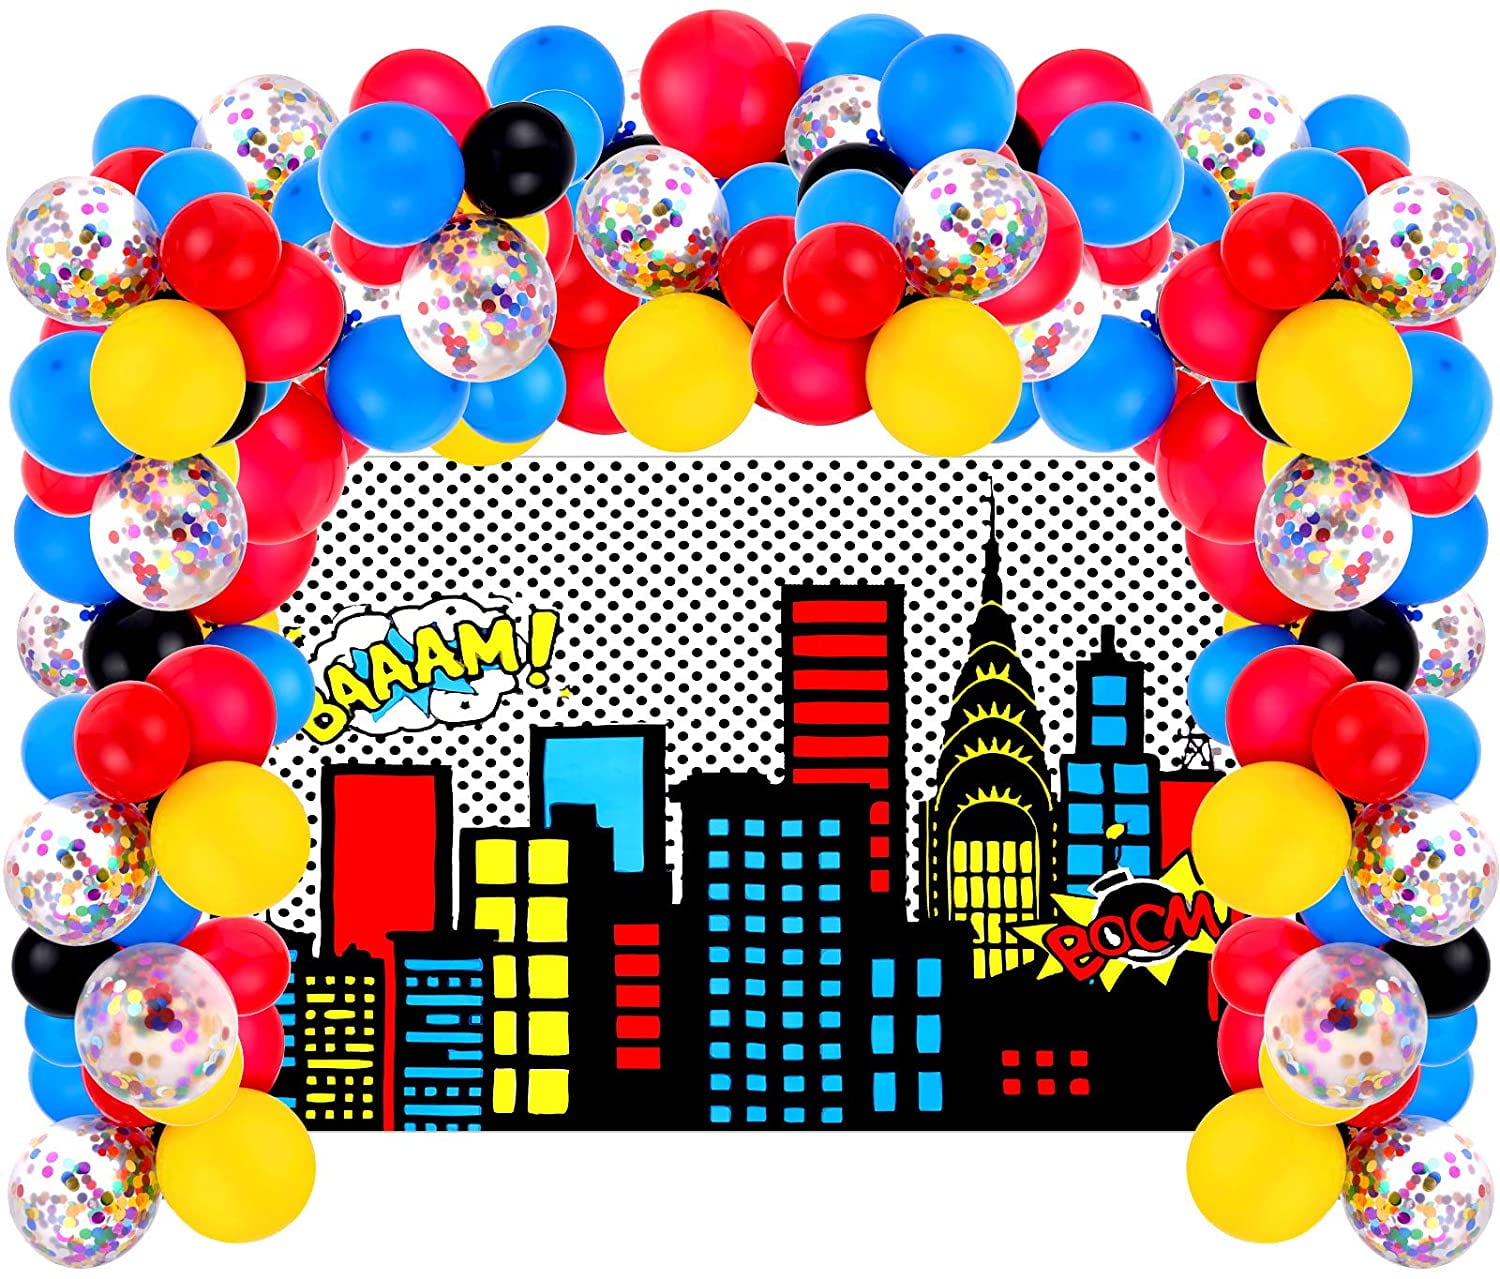 Details about   UK Disney Mickey Minnie Mouse Birthday Party Children Kids Decorations Balloons